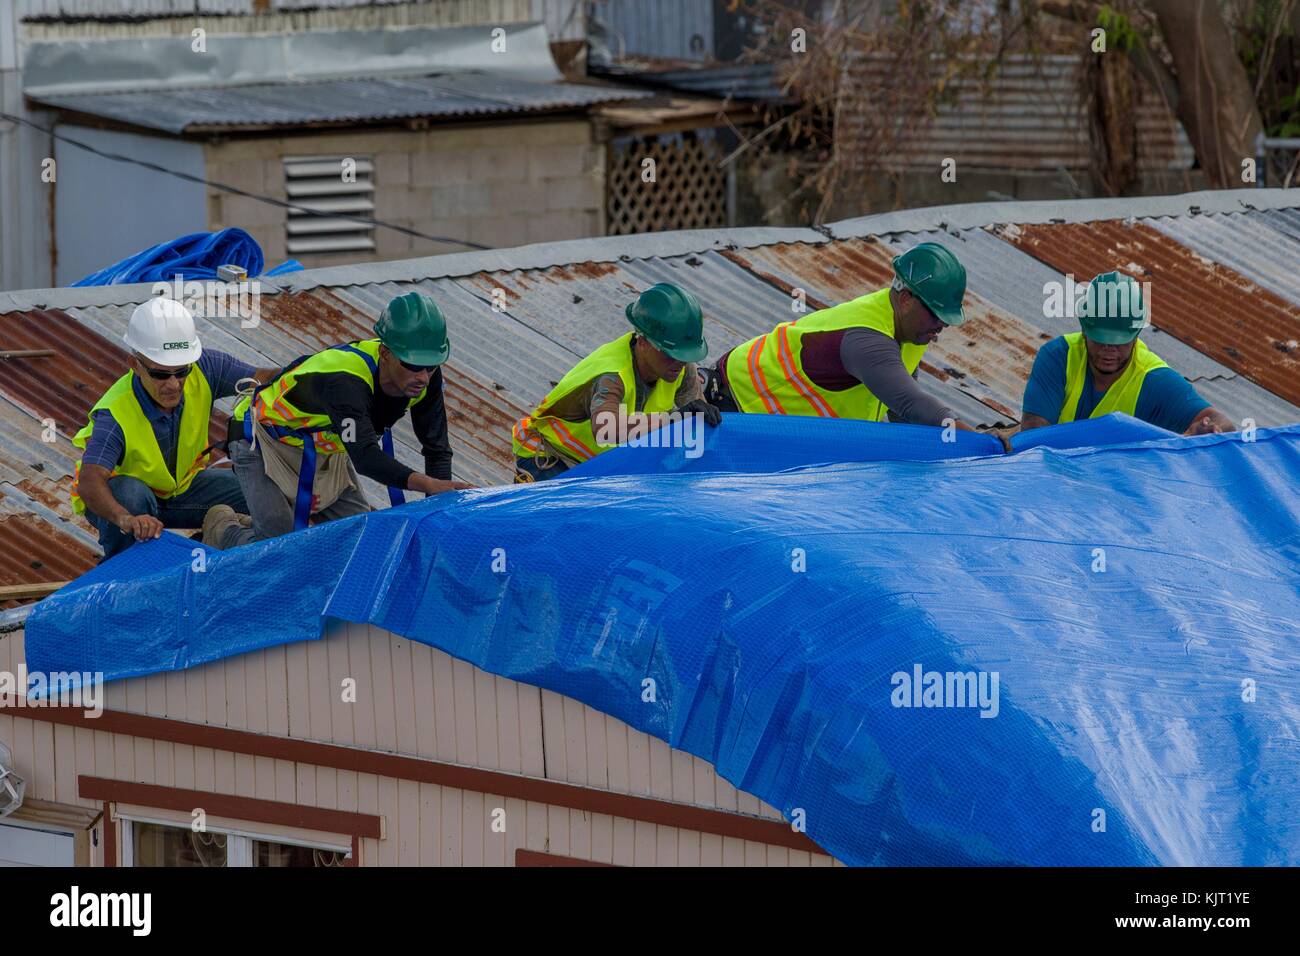 U.S. Army soldiers replaced damaged roofs with blue plastic tarps during relief efforts in the aftermath of Hurricane Maria October 28, 2017 in Ponce, Puerto Rico. (photo by Avery Cunningham via Planetpix) Stock Photo